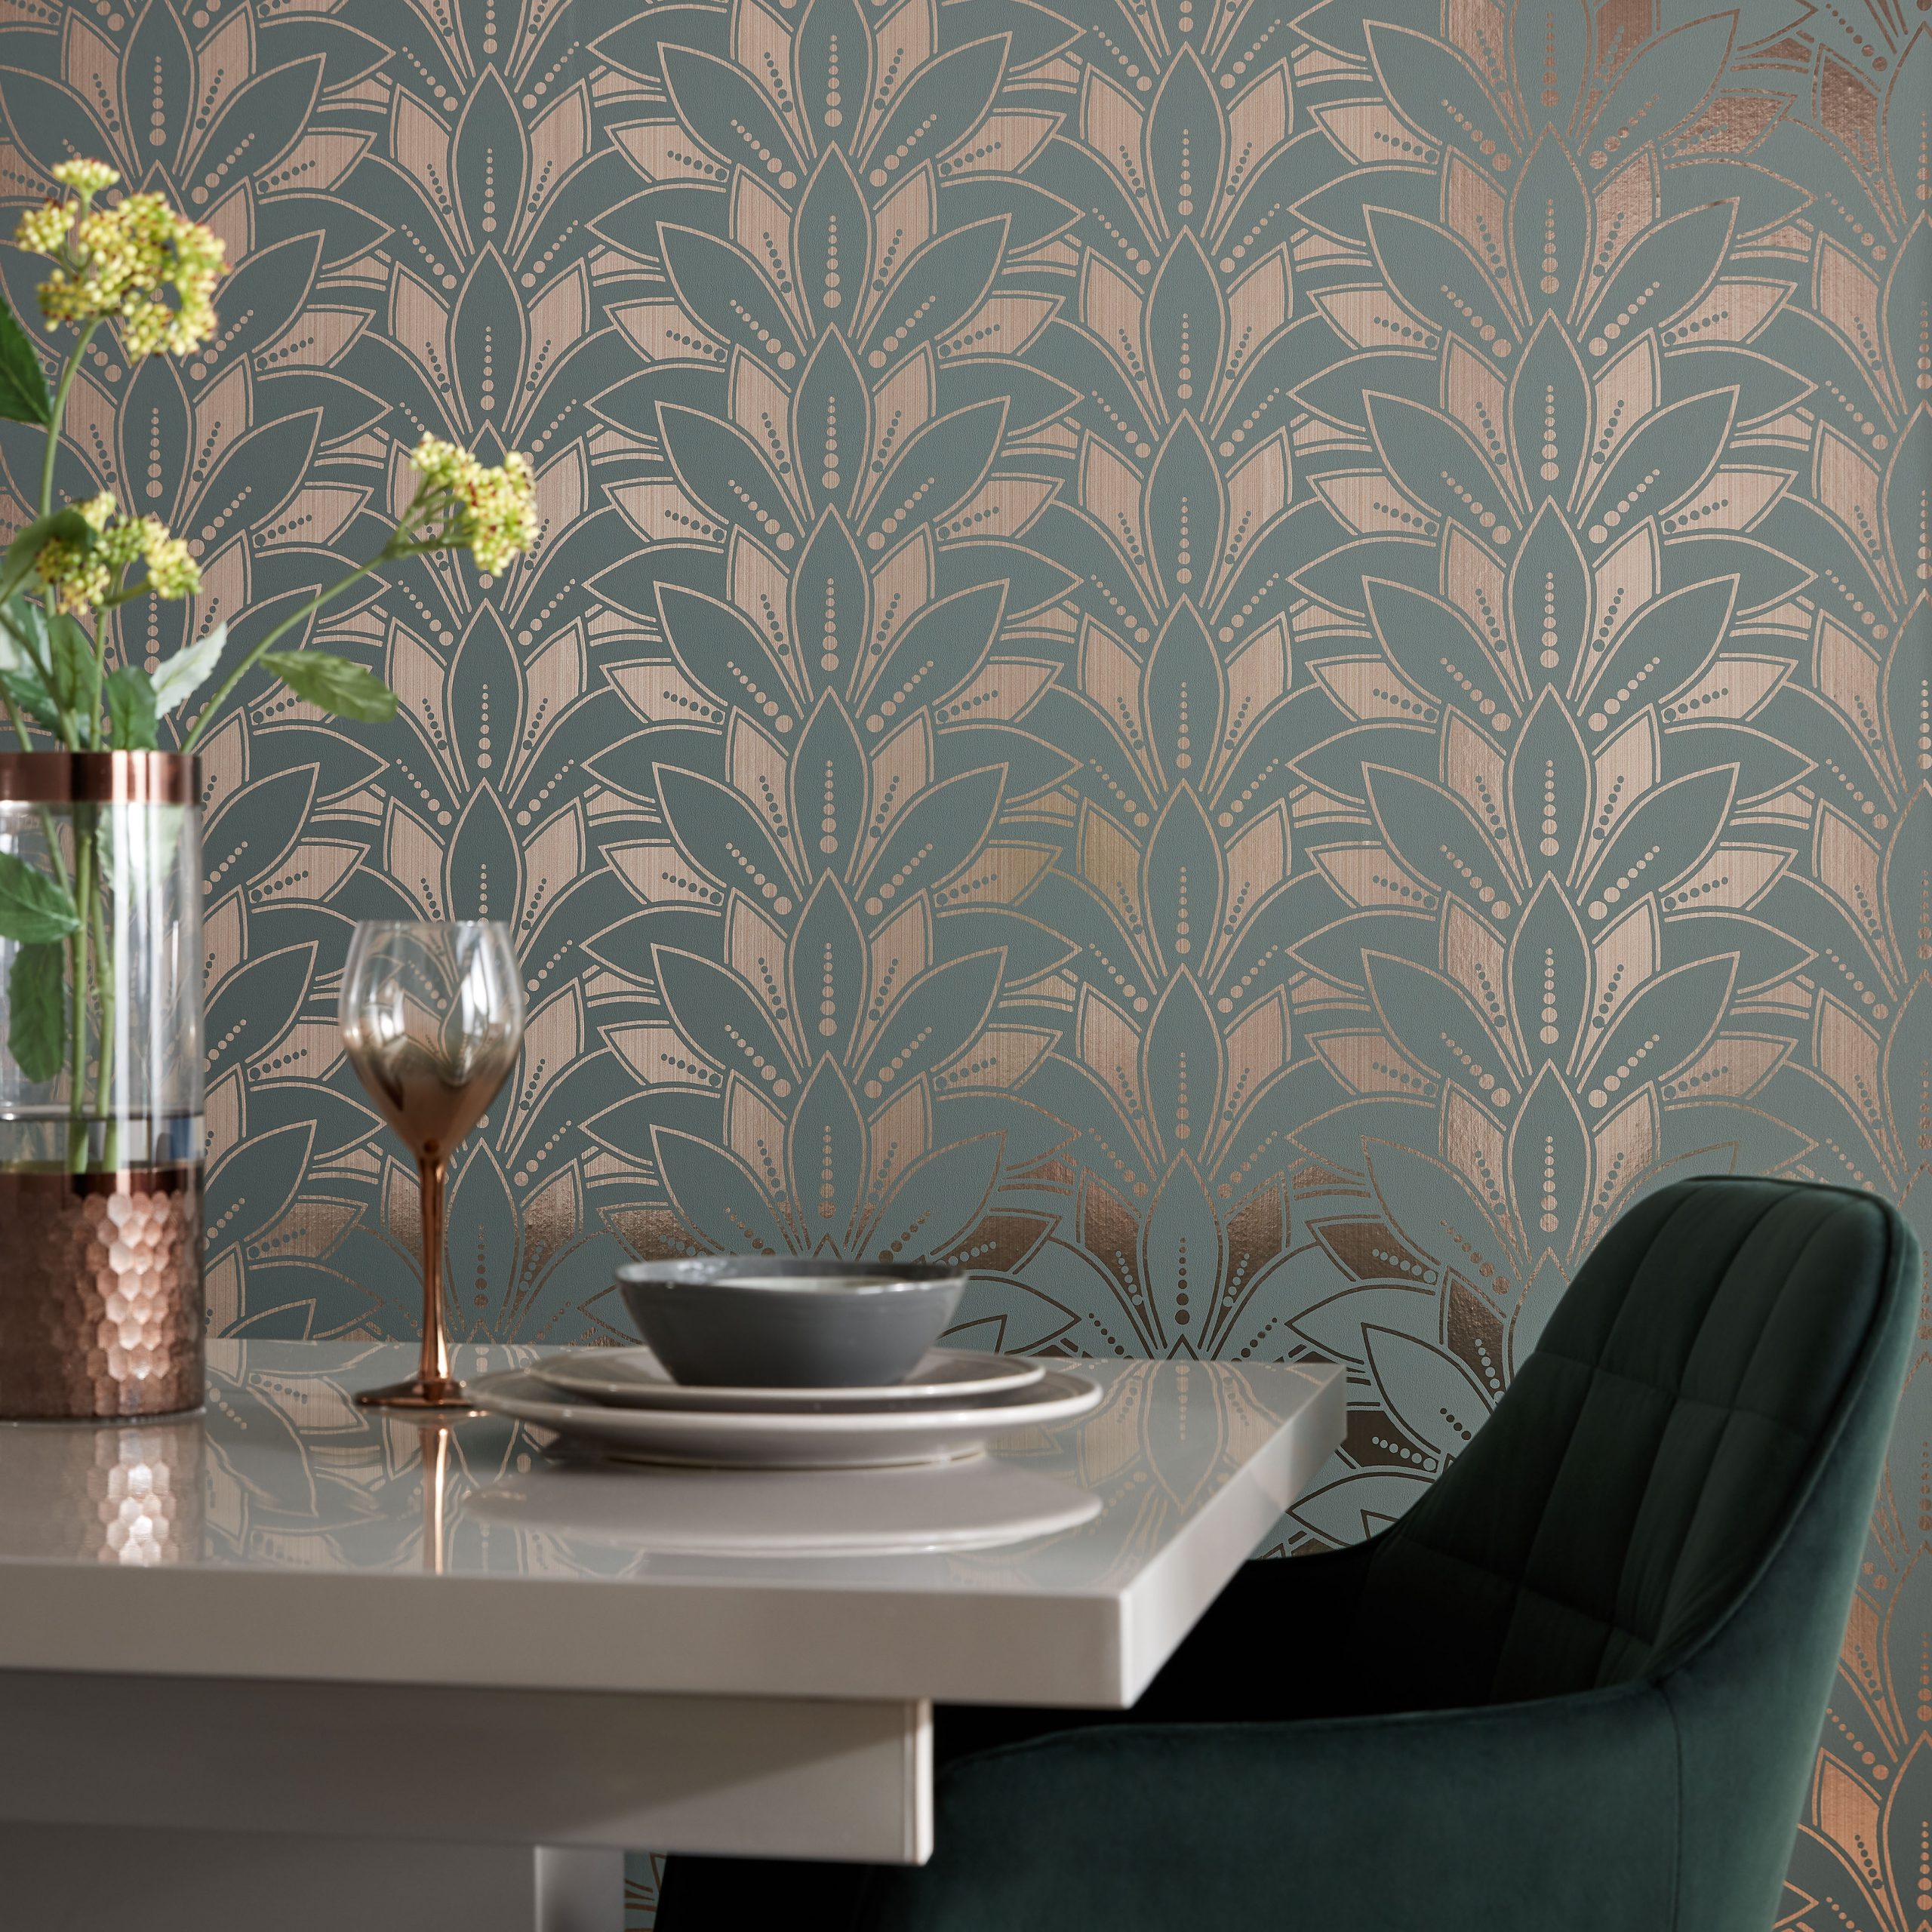 Tapet Astoria, Neo Mint Green and Gold Luxury Foil, 1838 Wallcoverings, 5.3mp / rola 1838